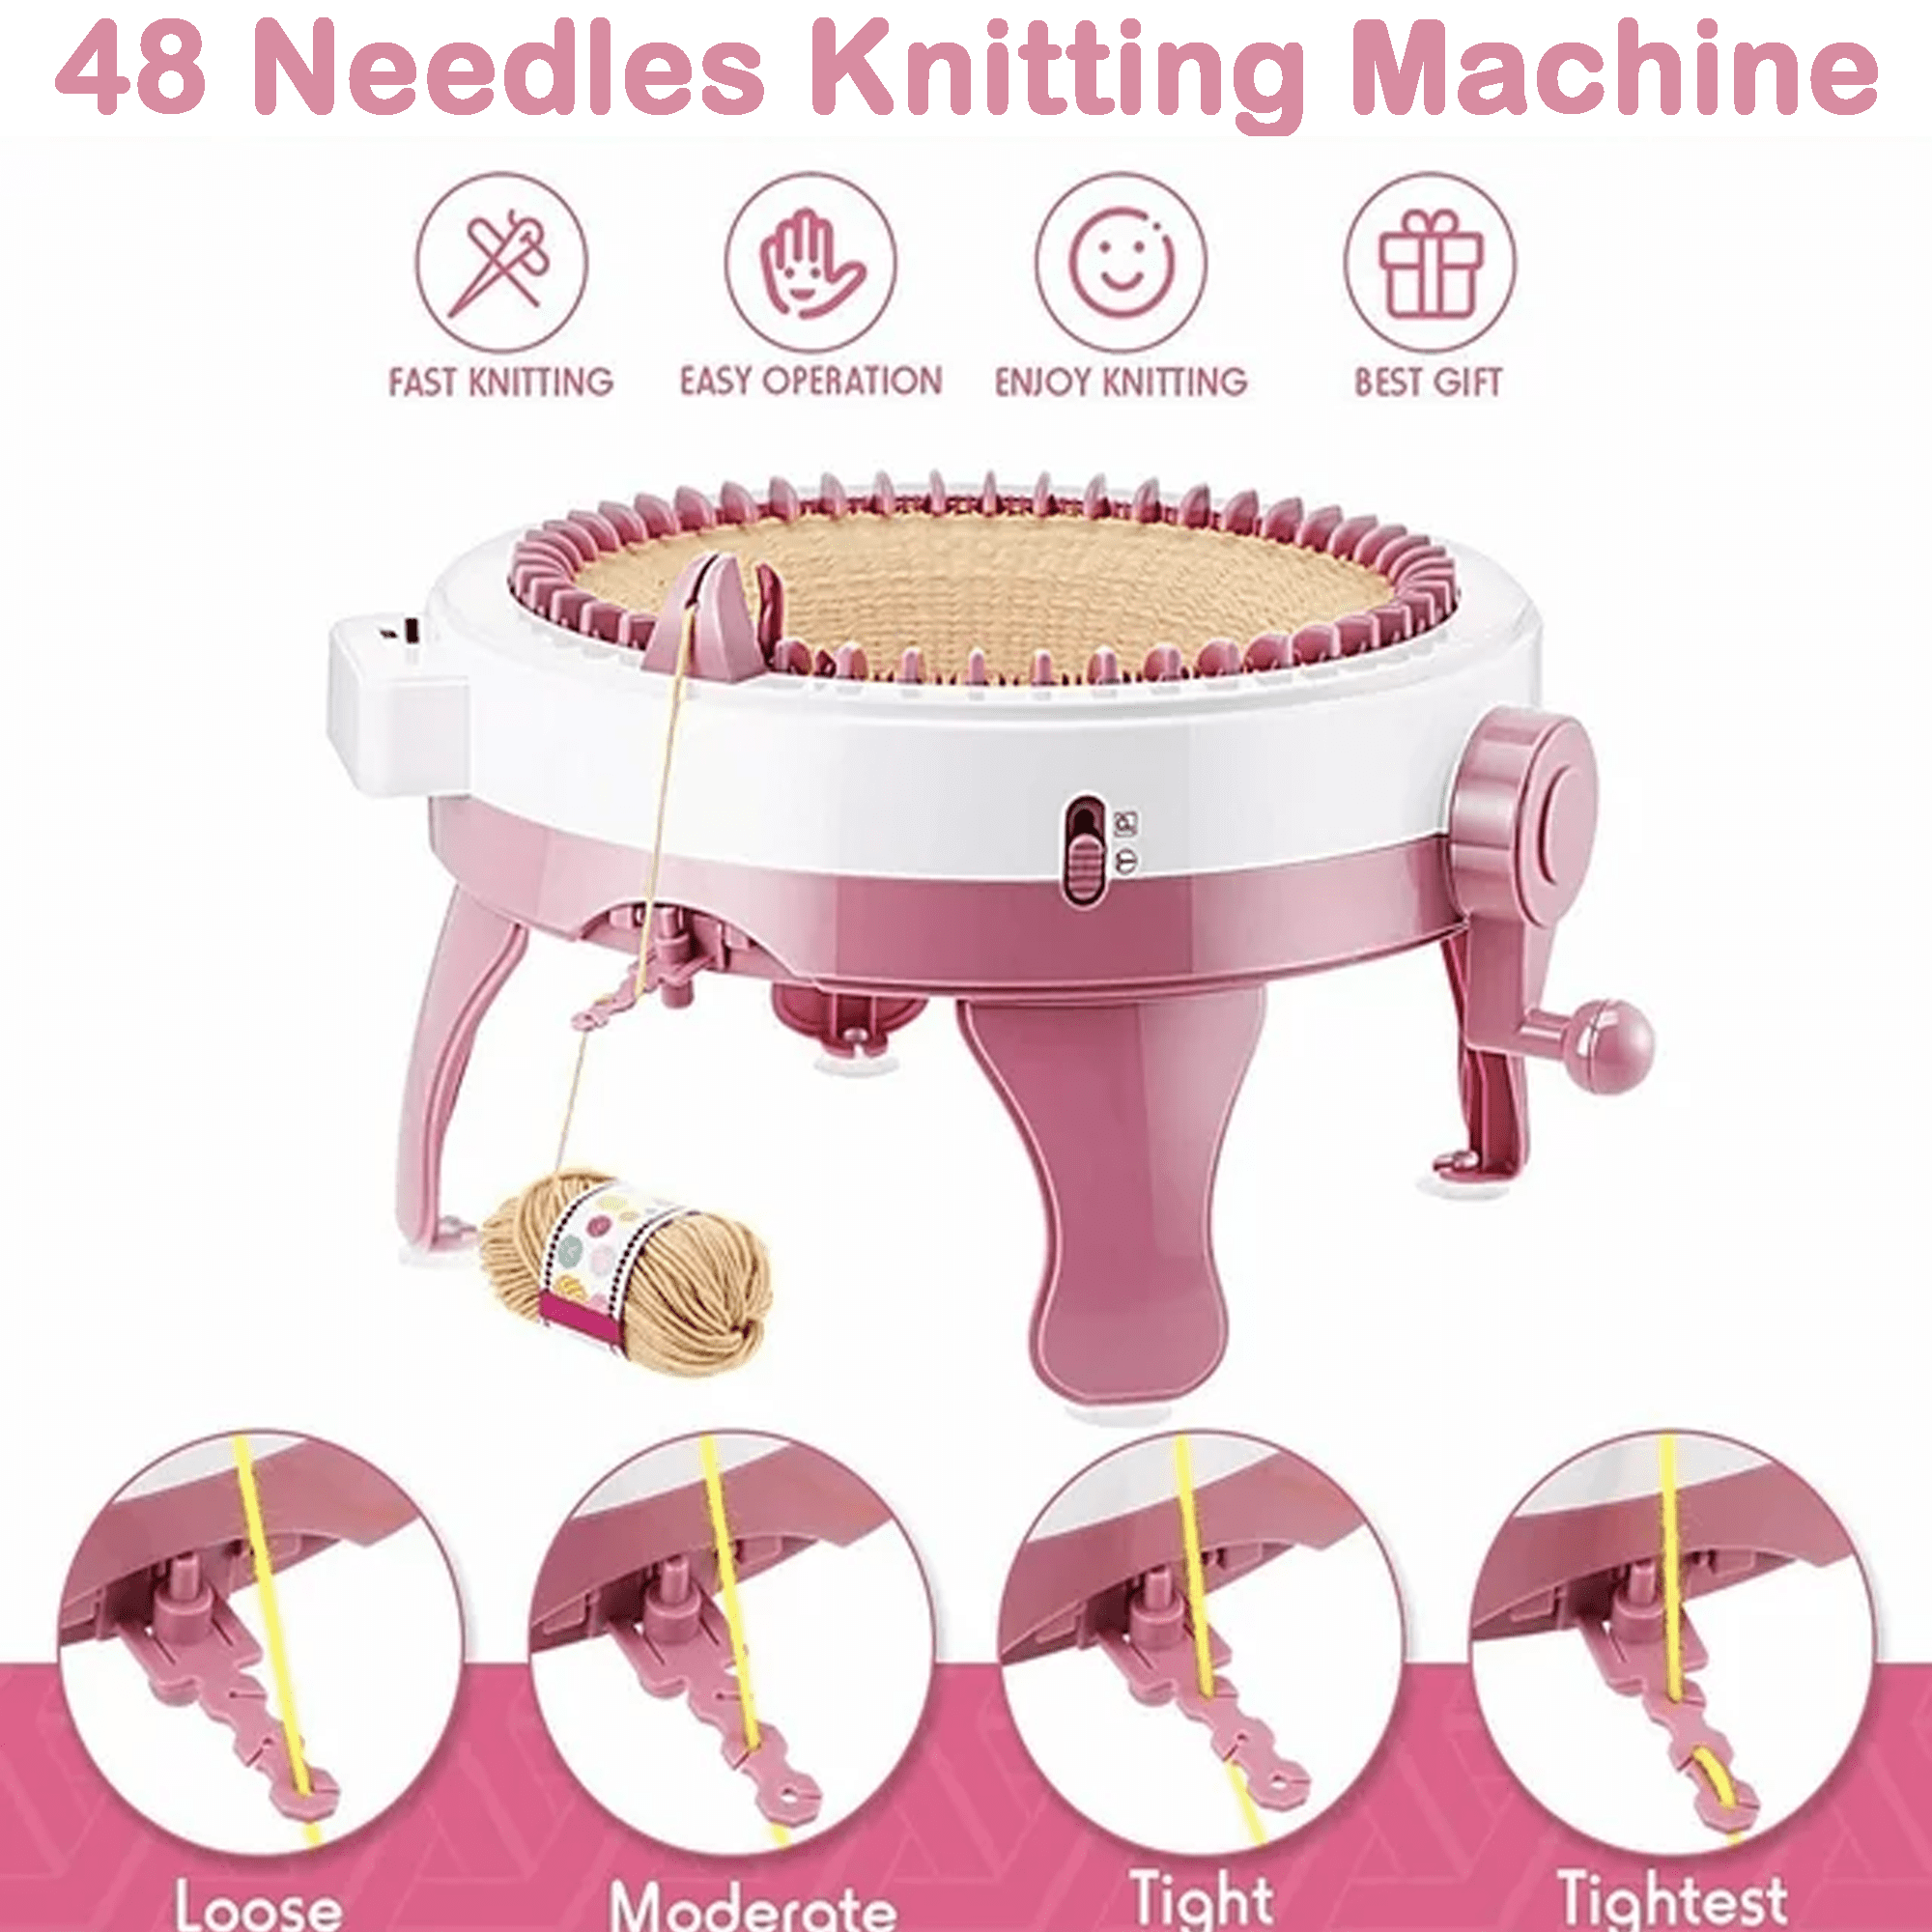 Giant Star Machinery High Quality Best 48 Pin Industrial Knitting